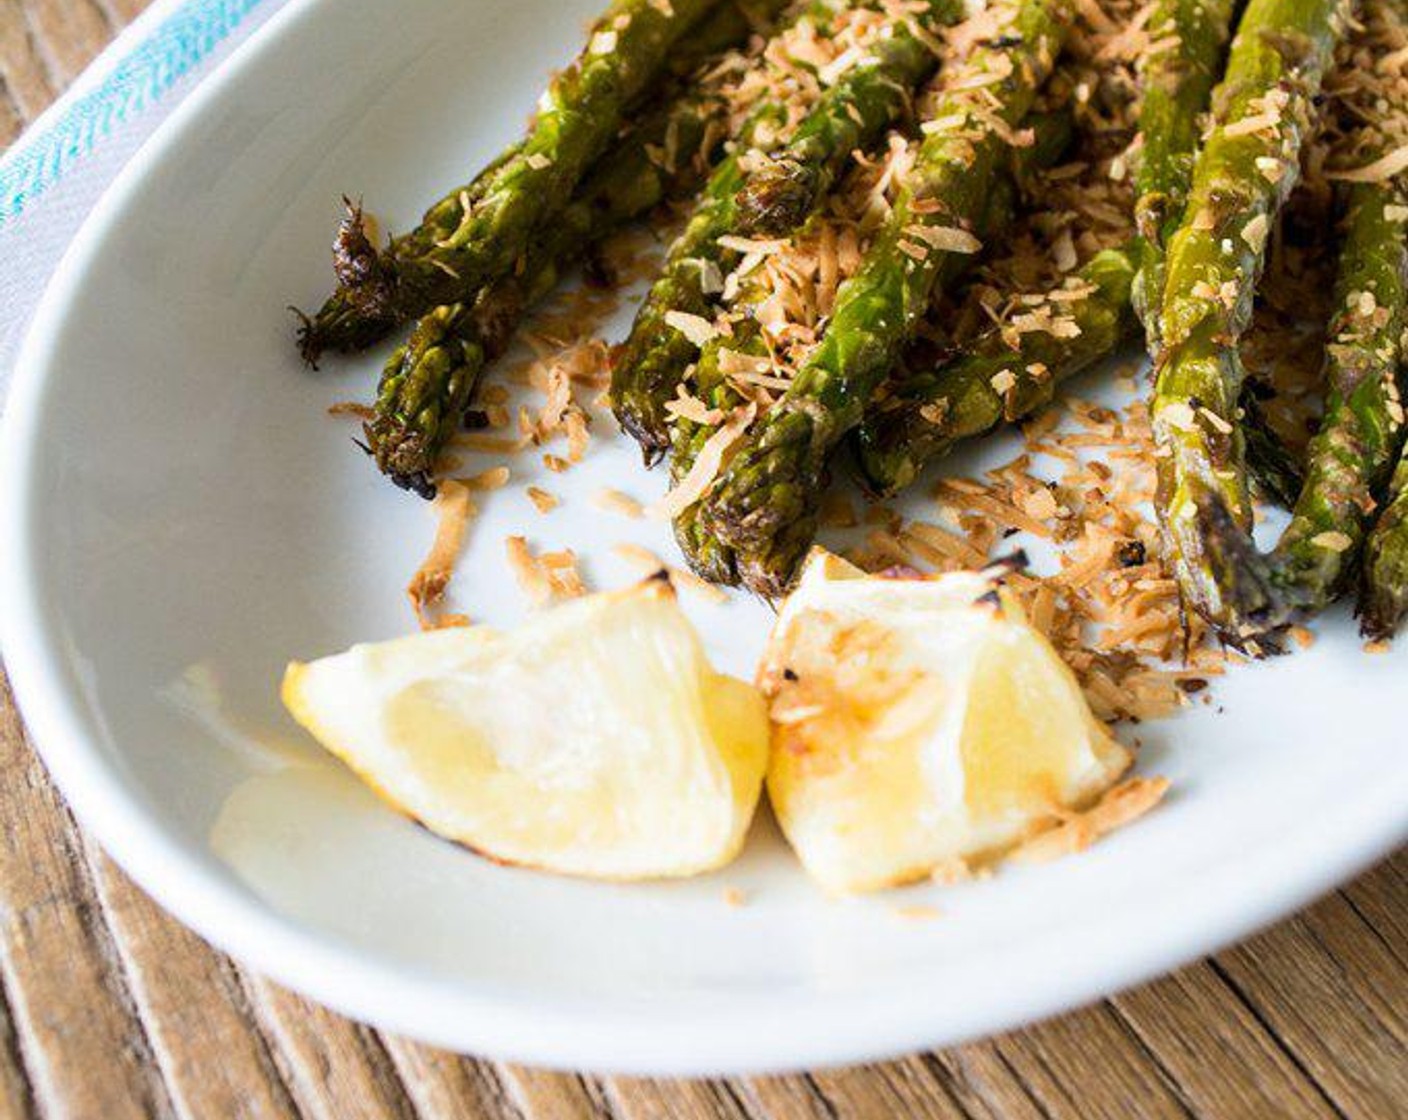 Lemon Ginger Asparagus with Toasted Coconut